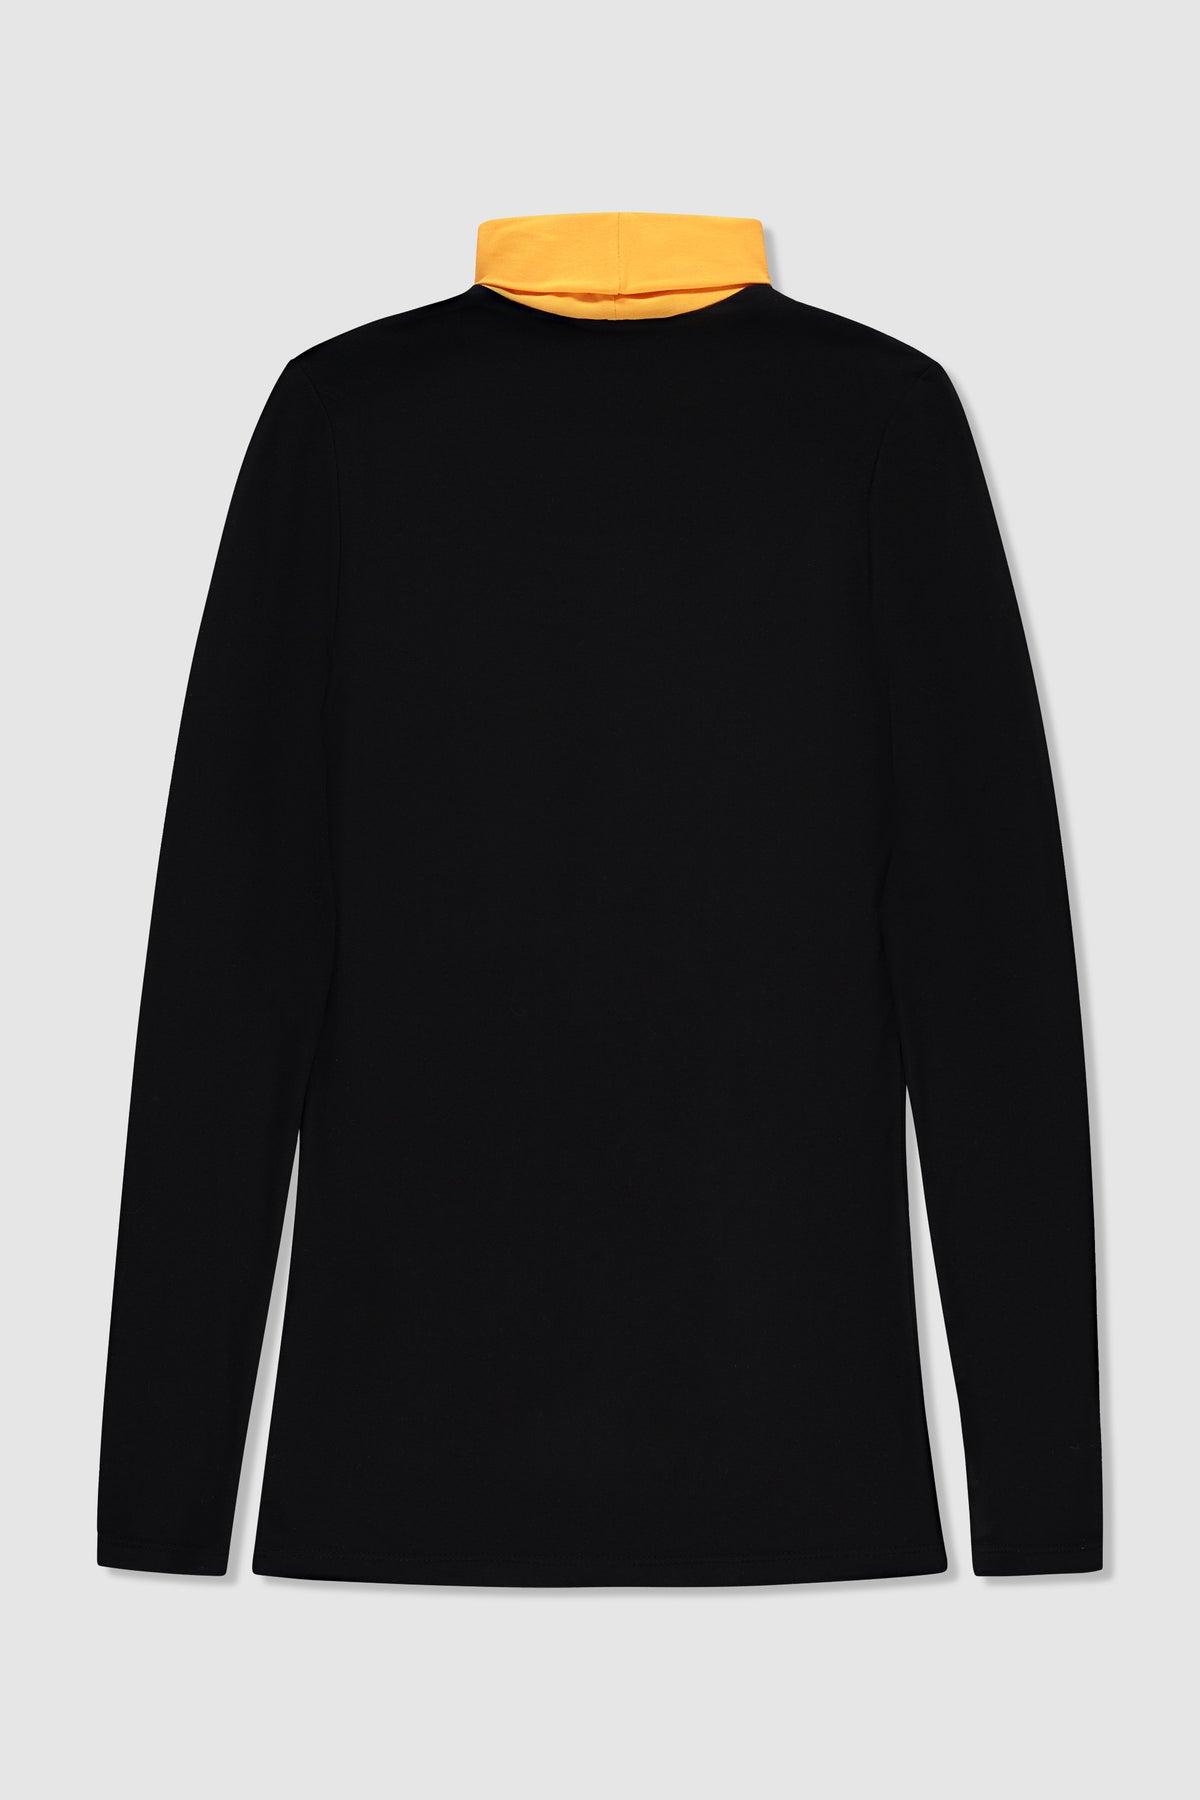 OEILLET. Two-tone turtleneck. Bamboo